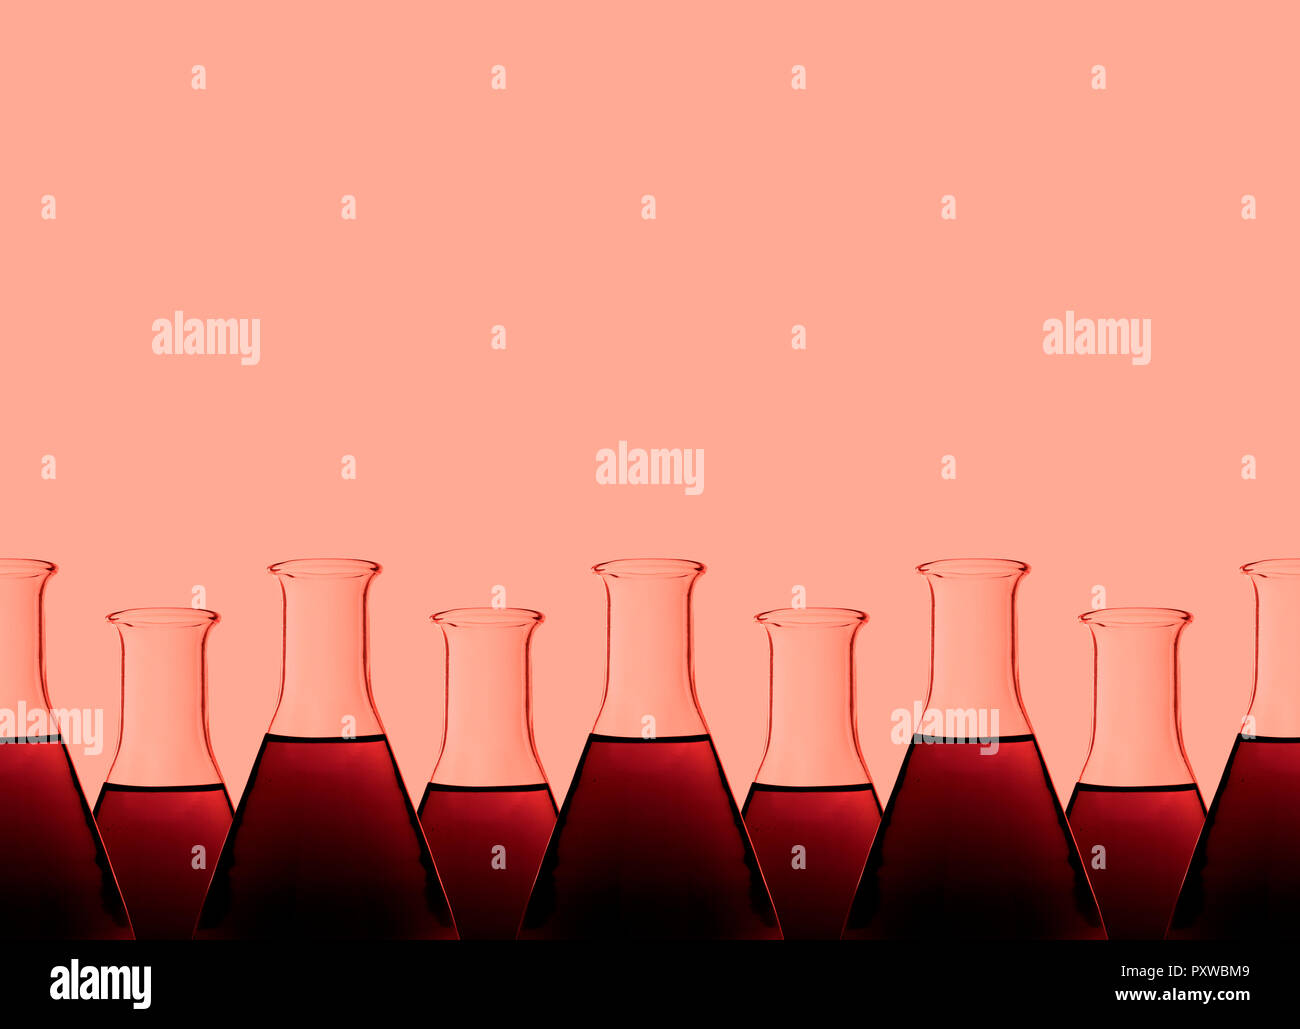 Row of test tubes with liquid, red background Stock Photo